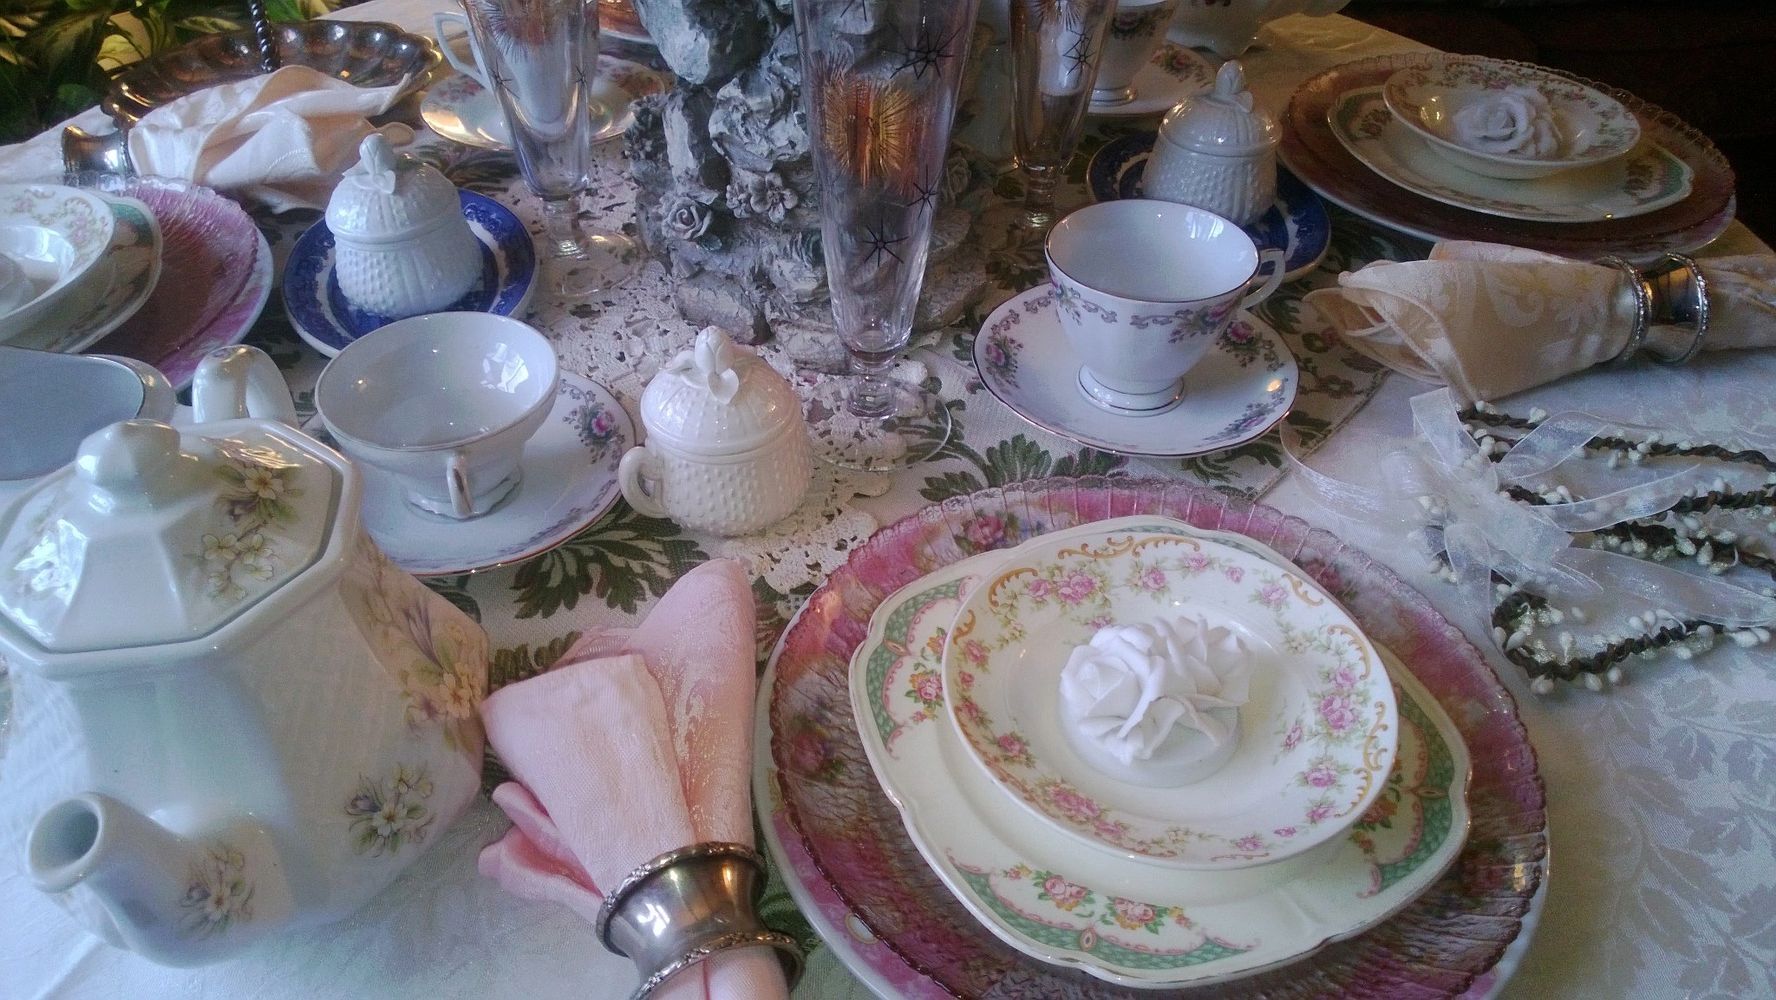 Vintage Glam Tea Party Table Setting